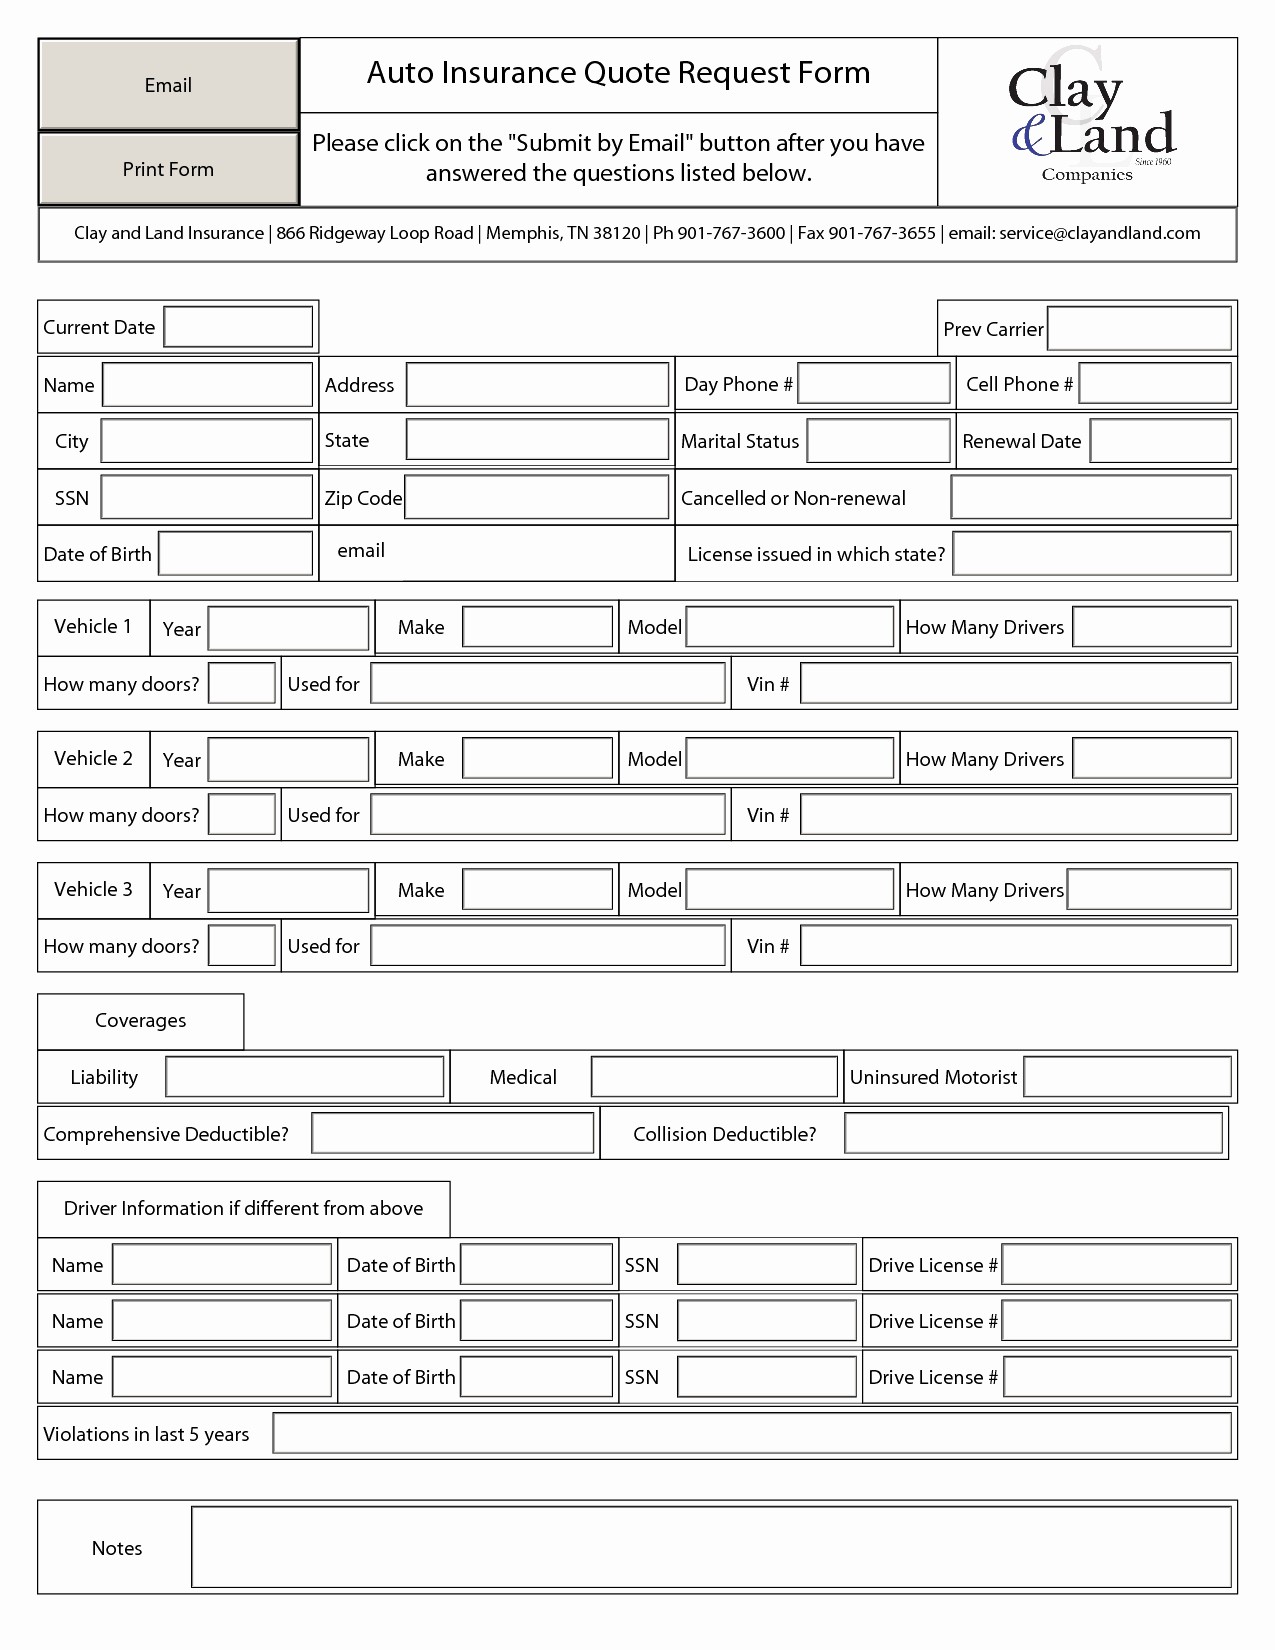 Auto Insurance Comparison Excel Spreadsheet Awesome